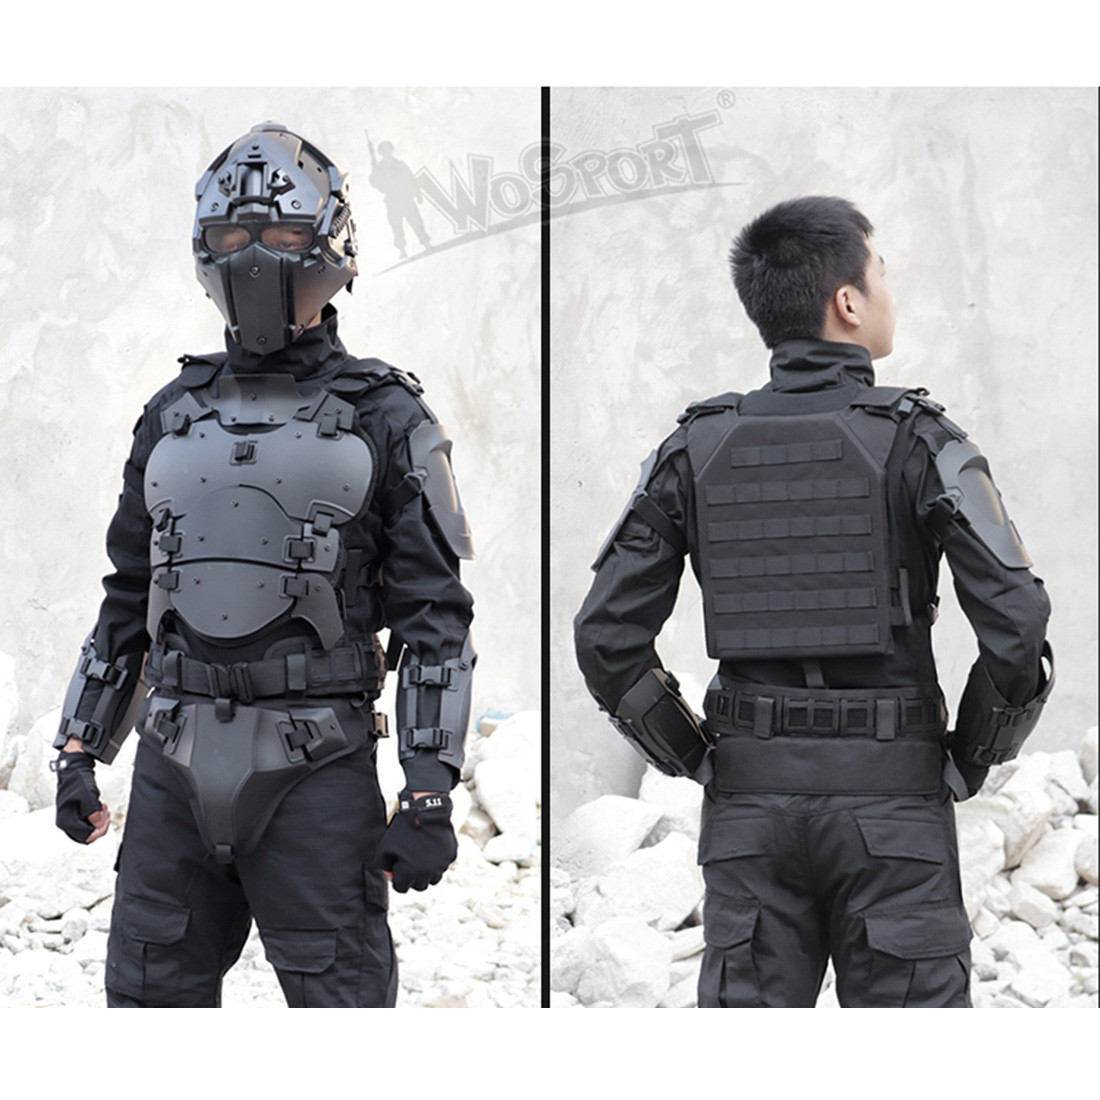 US$ 139.99 - WST Outdoor Multi-function Tactical Armor Set Adjustable ...